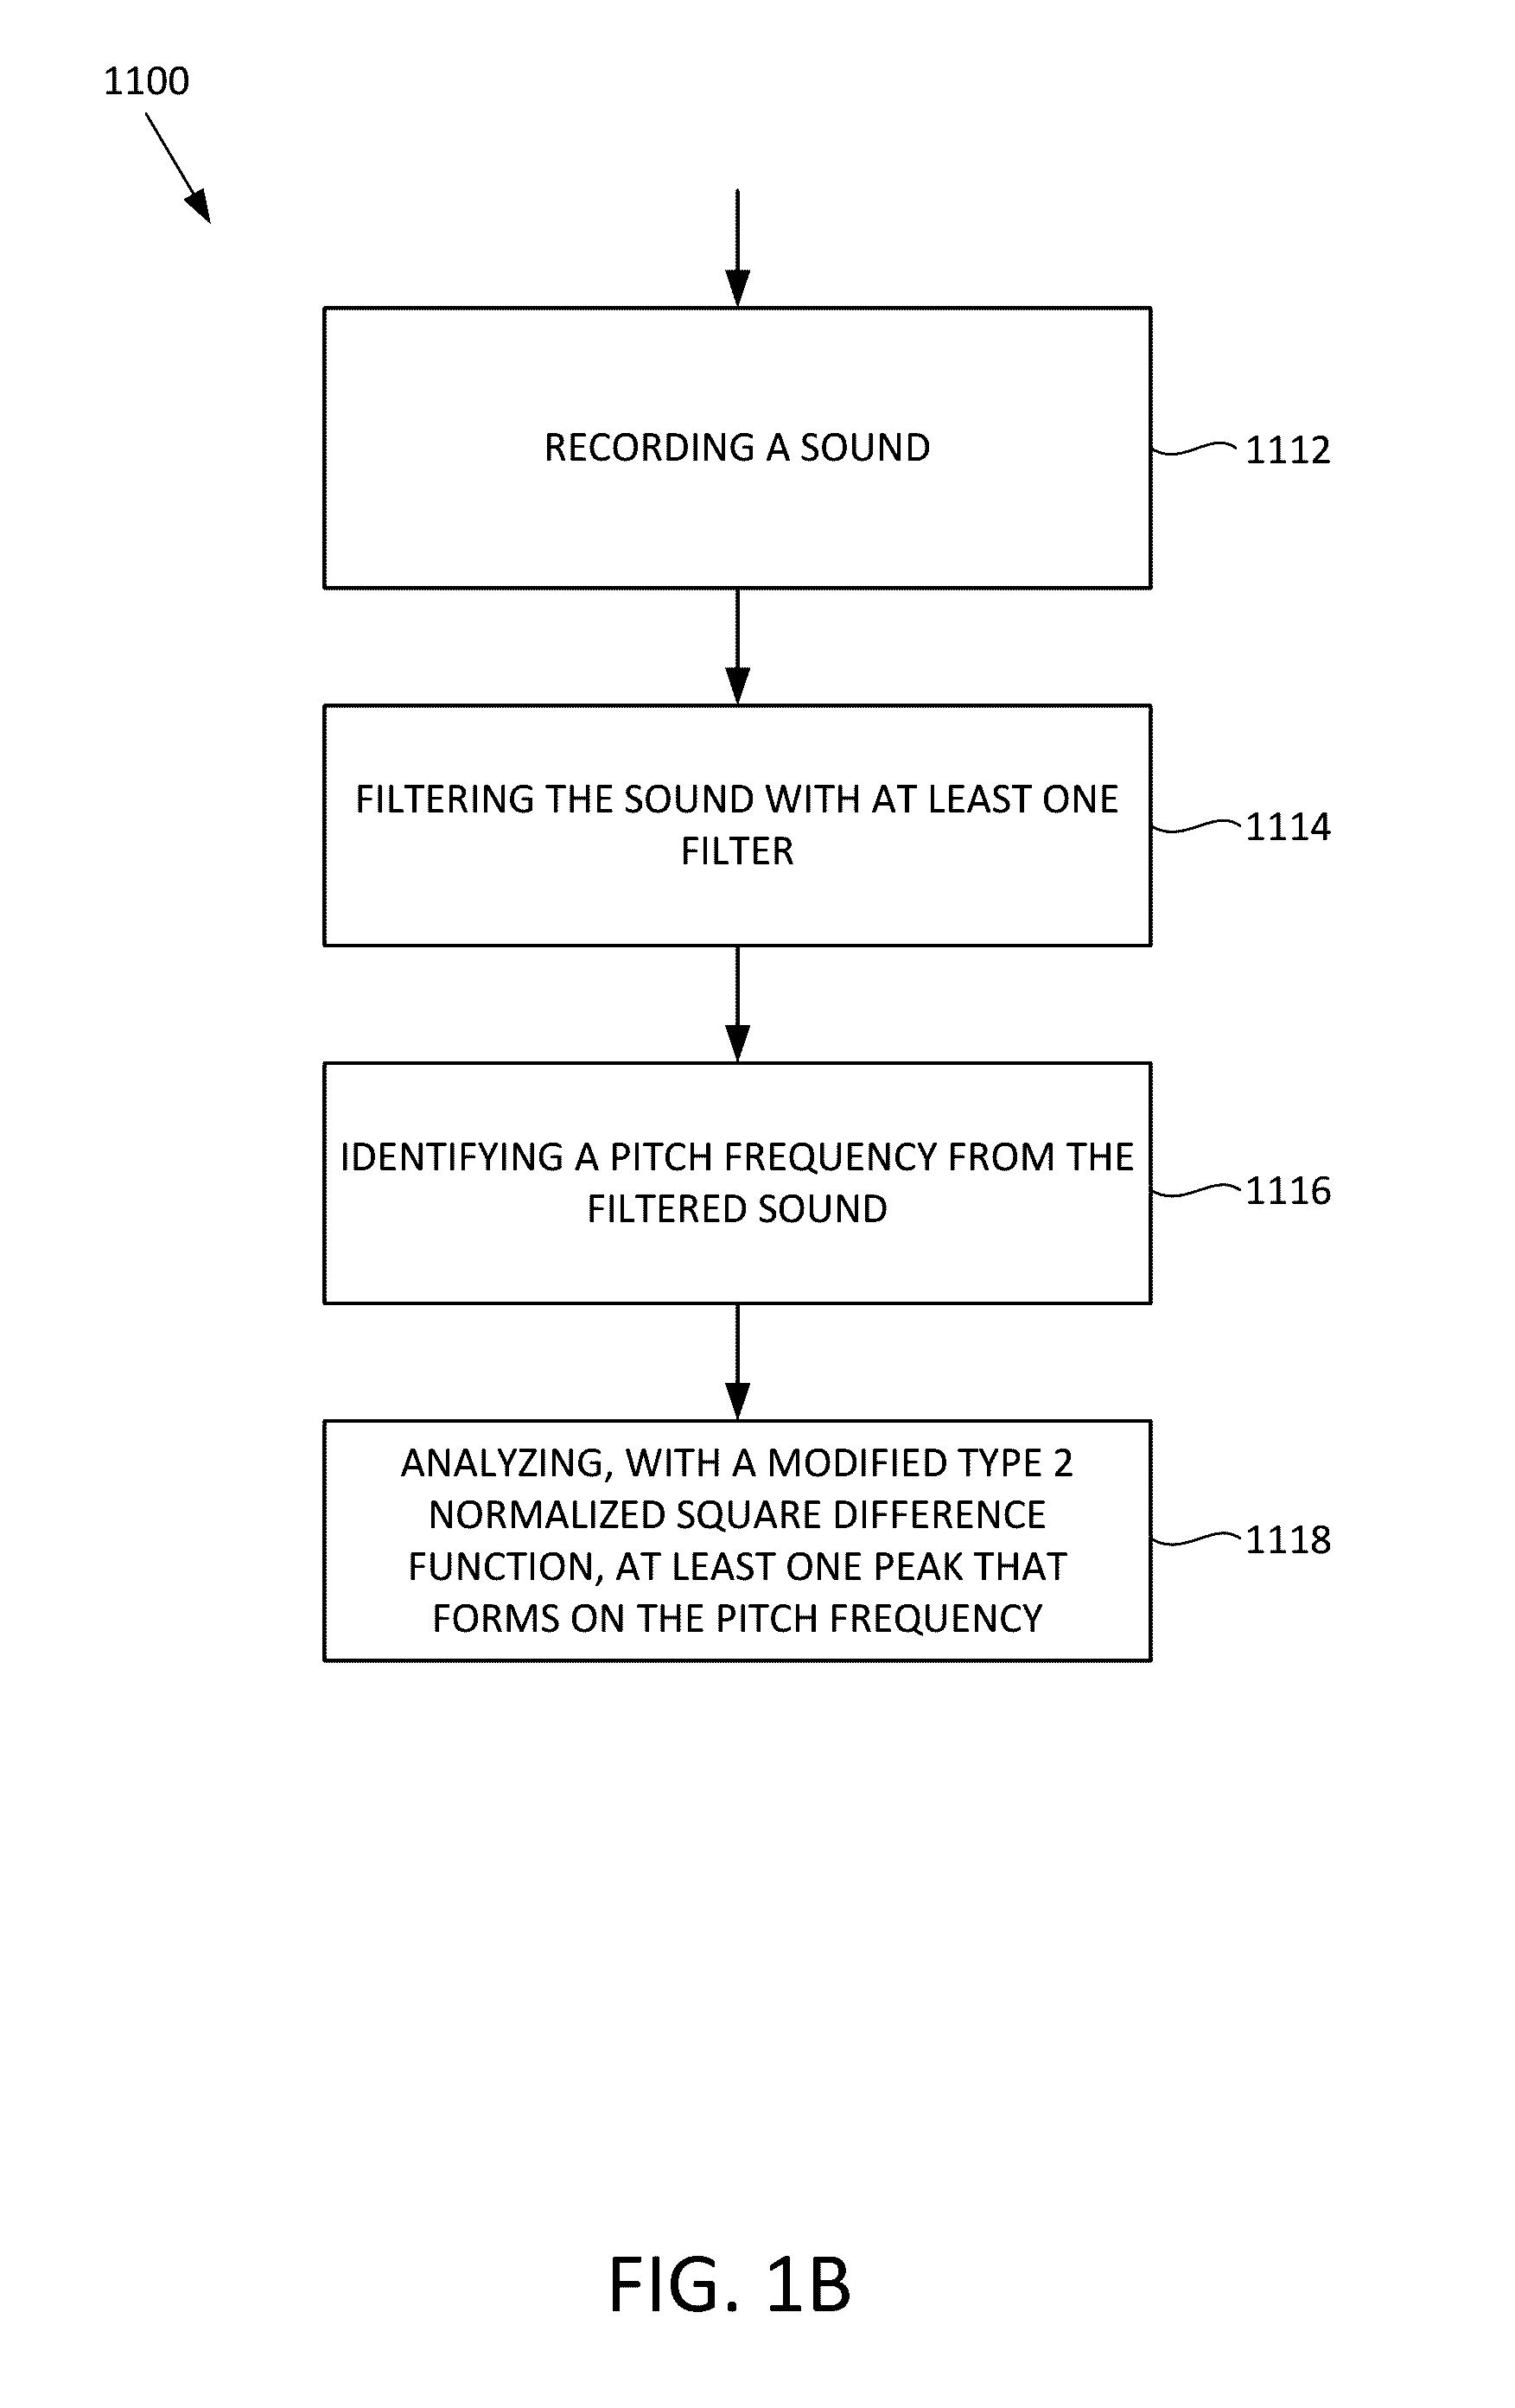 Systems and methods for quantifying a sound into dynamic pitch-based graphs